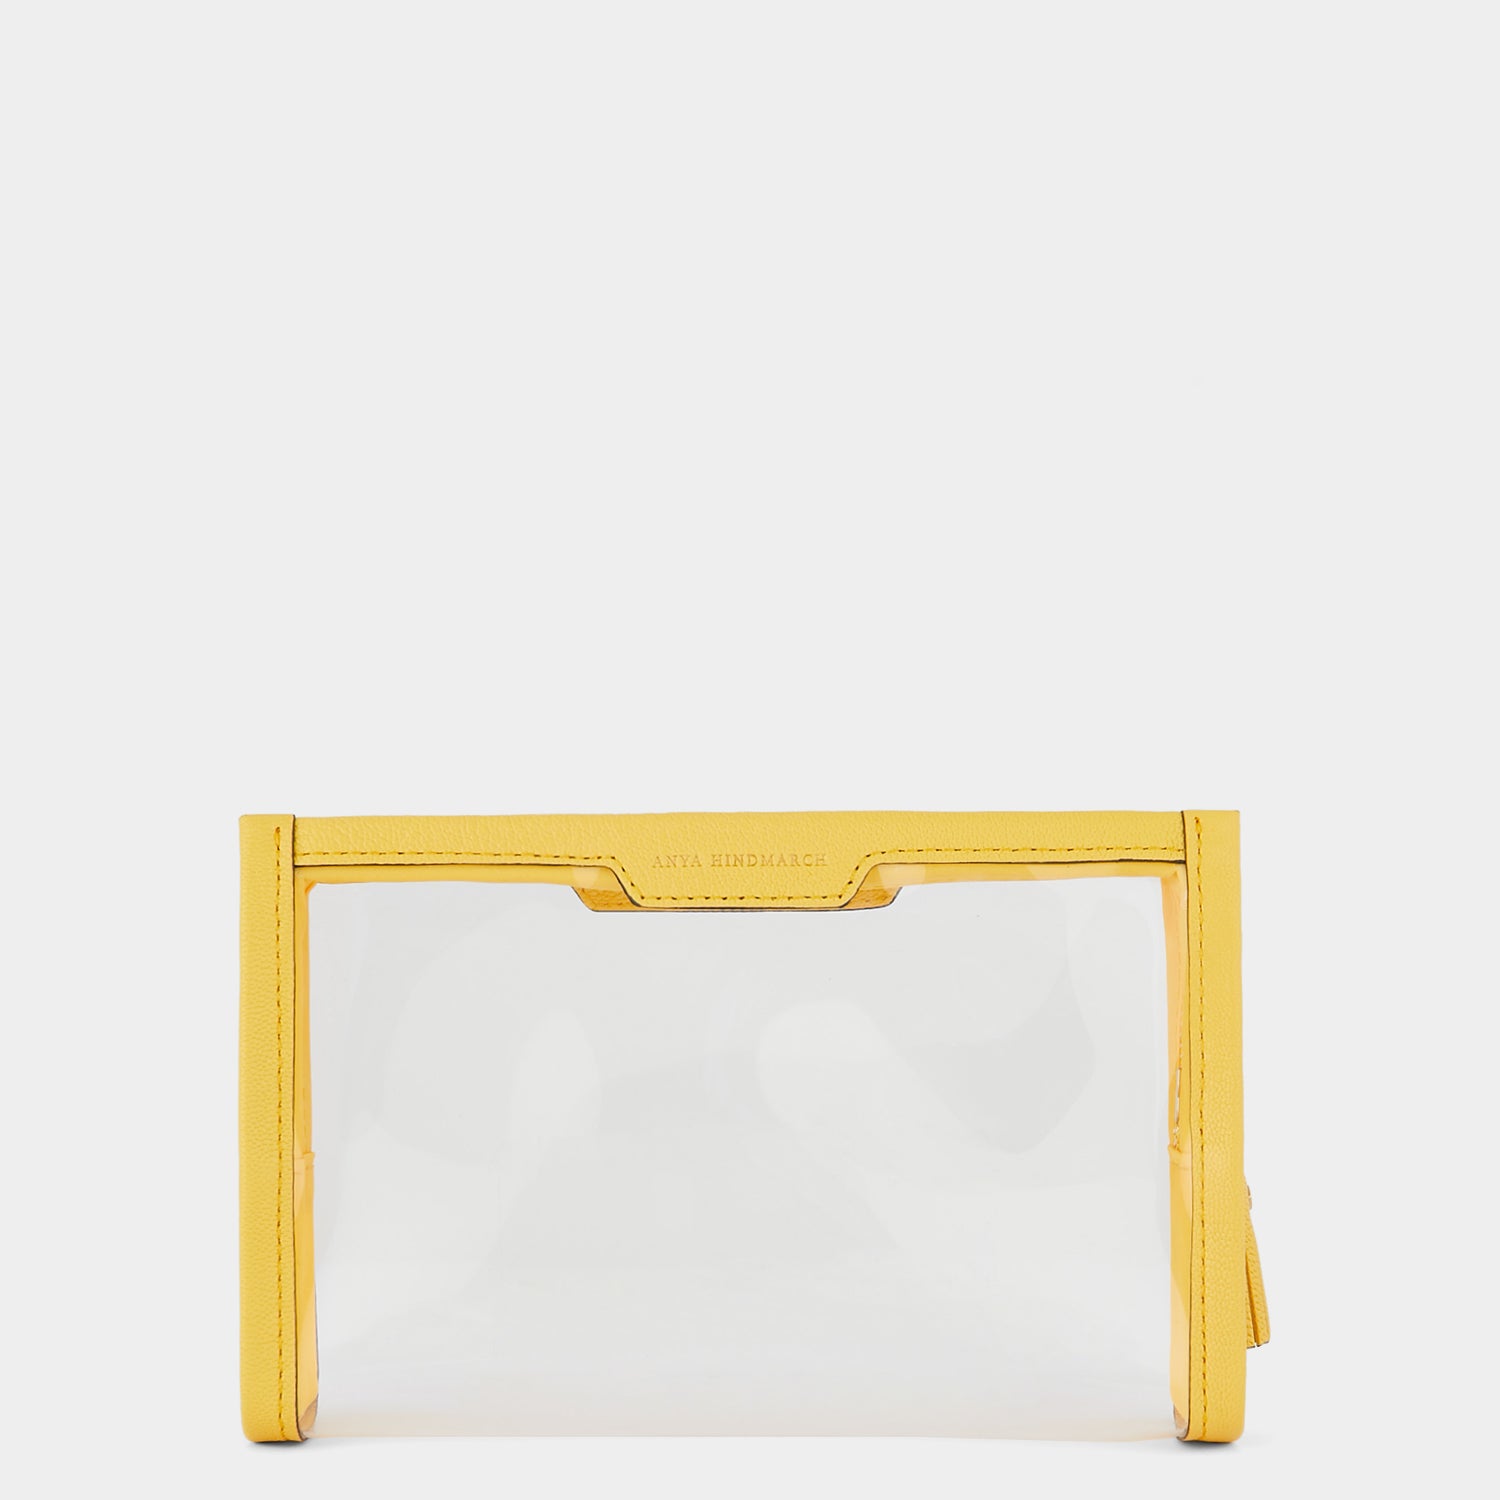 Little Things Pouch -

                  
                    Capra Leather in Yellow -
                  

                  Anya Hindmarch UK
